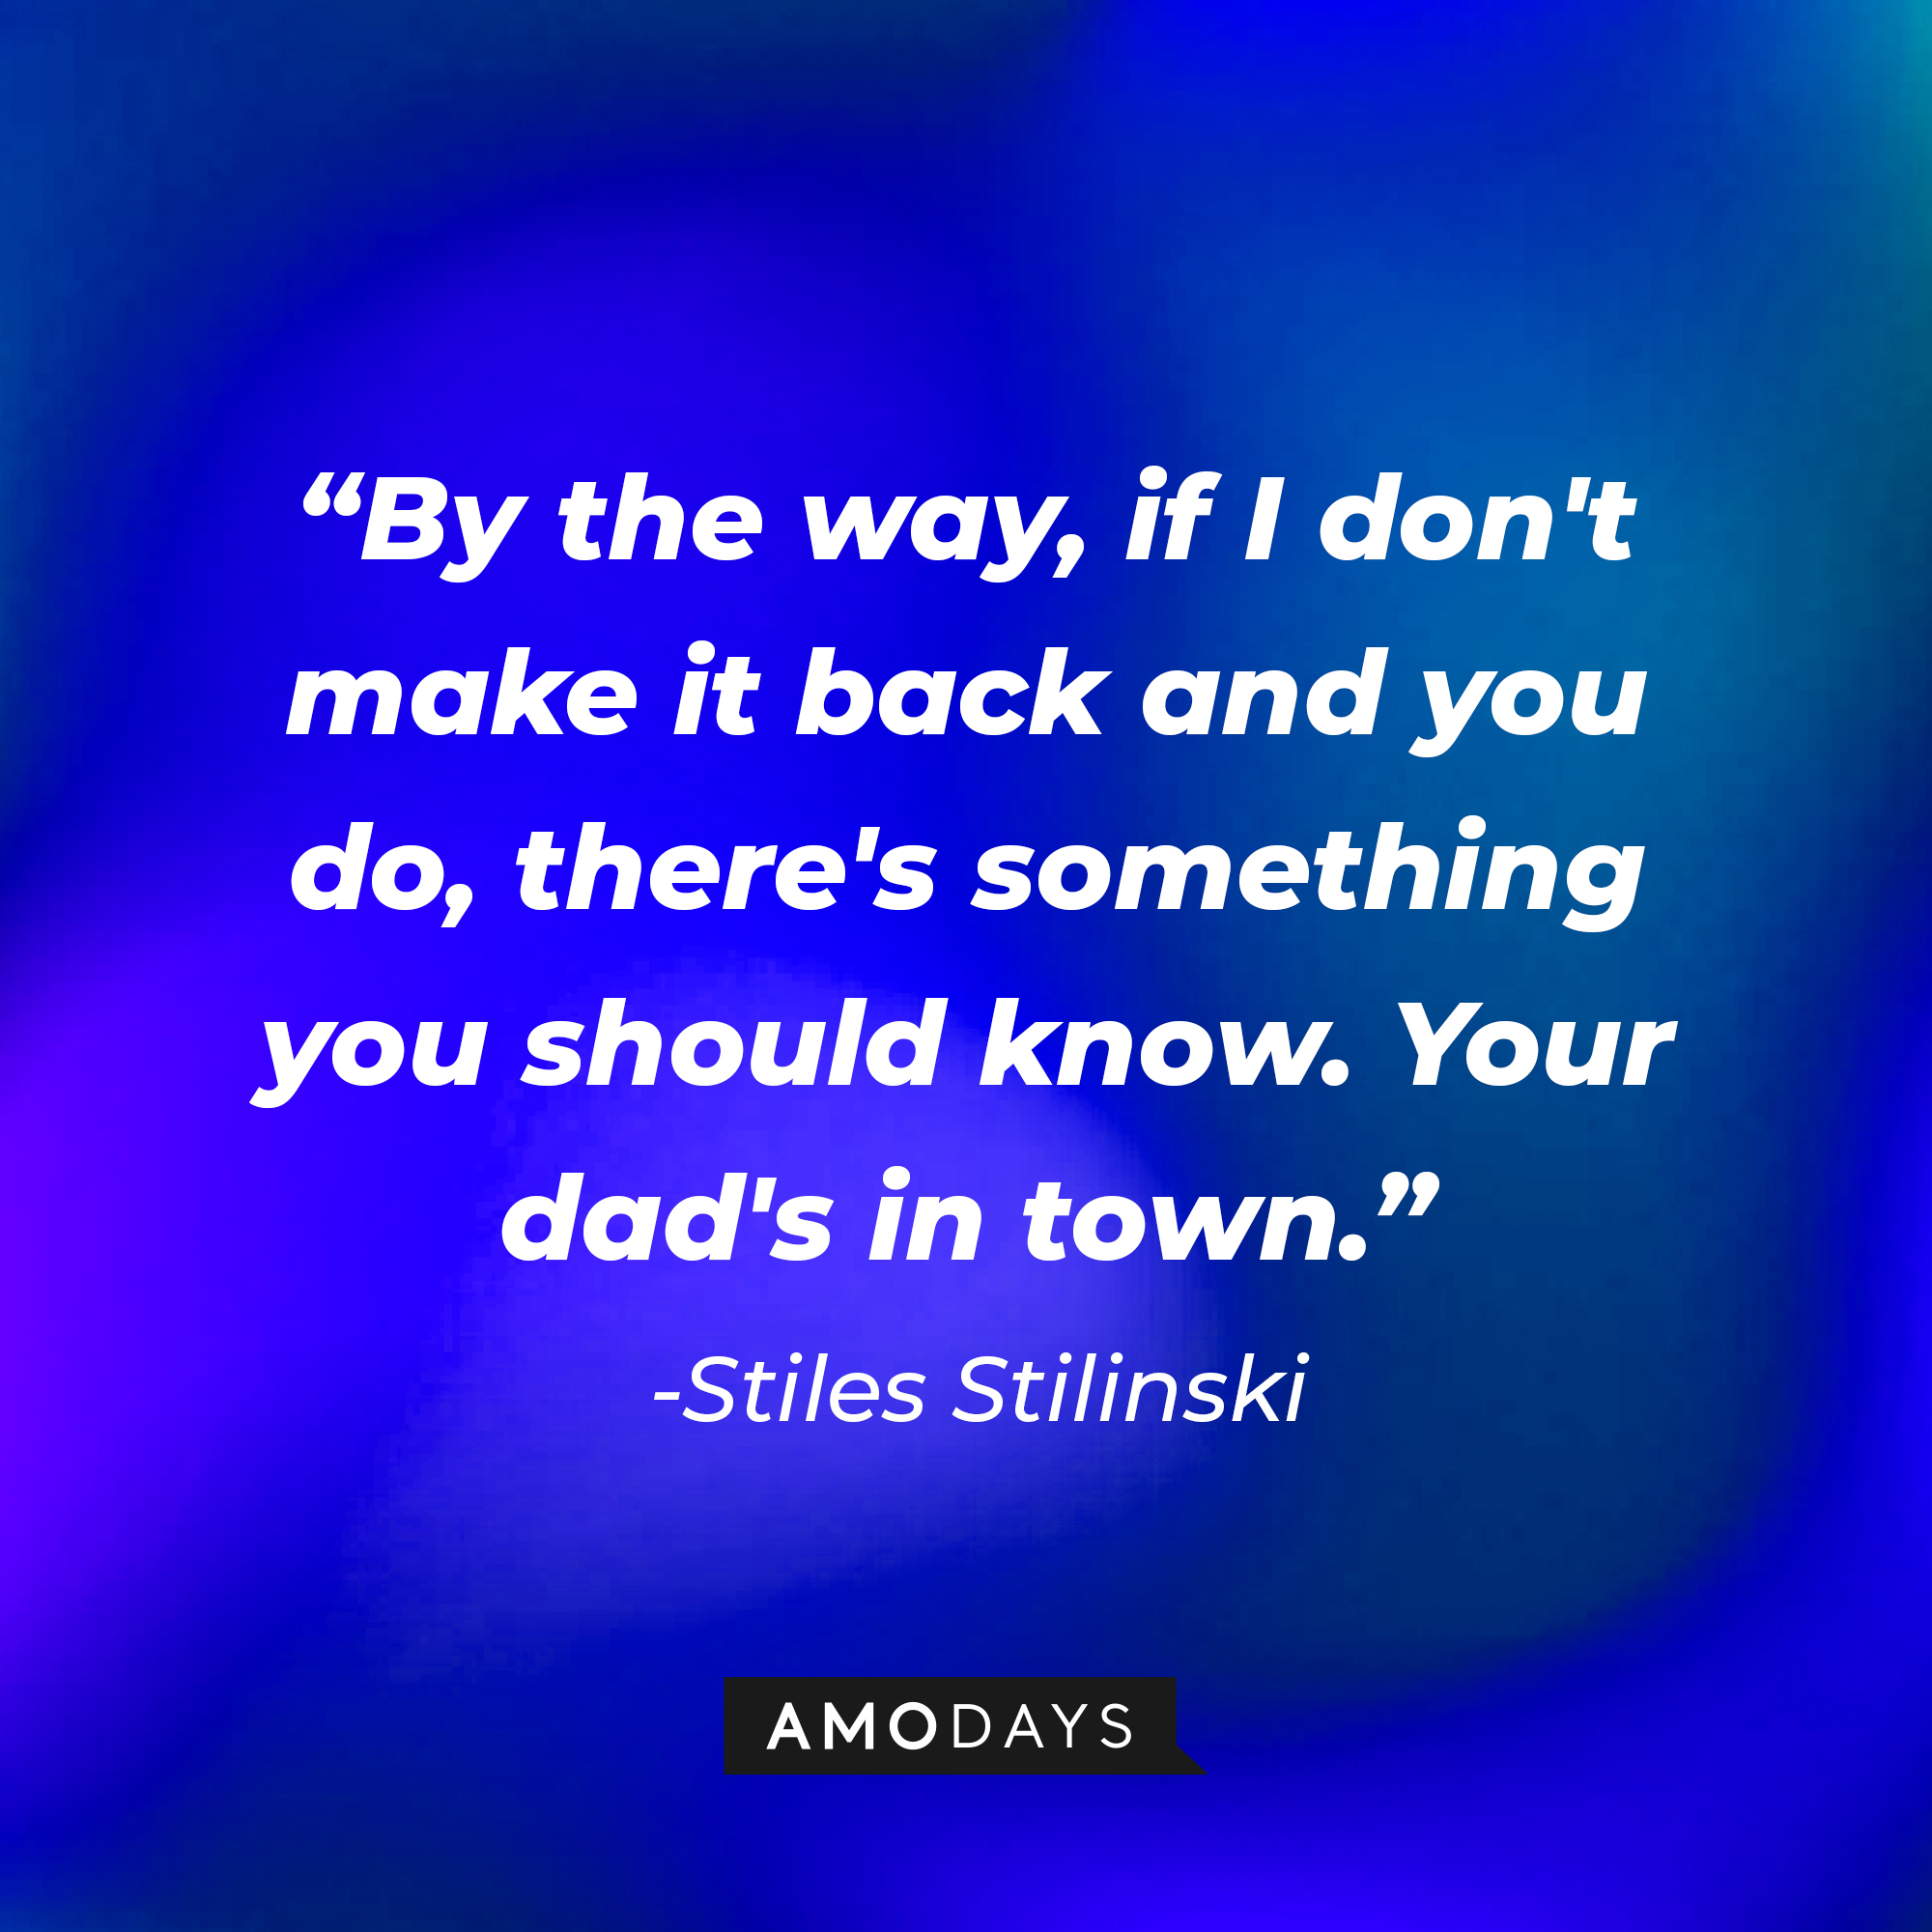 Stiles Stilinski's quote: "By the way, if I don't make it back and you do, there's something you should know. Your dad's in town." | Image: AmoDays